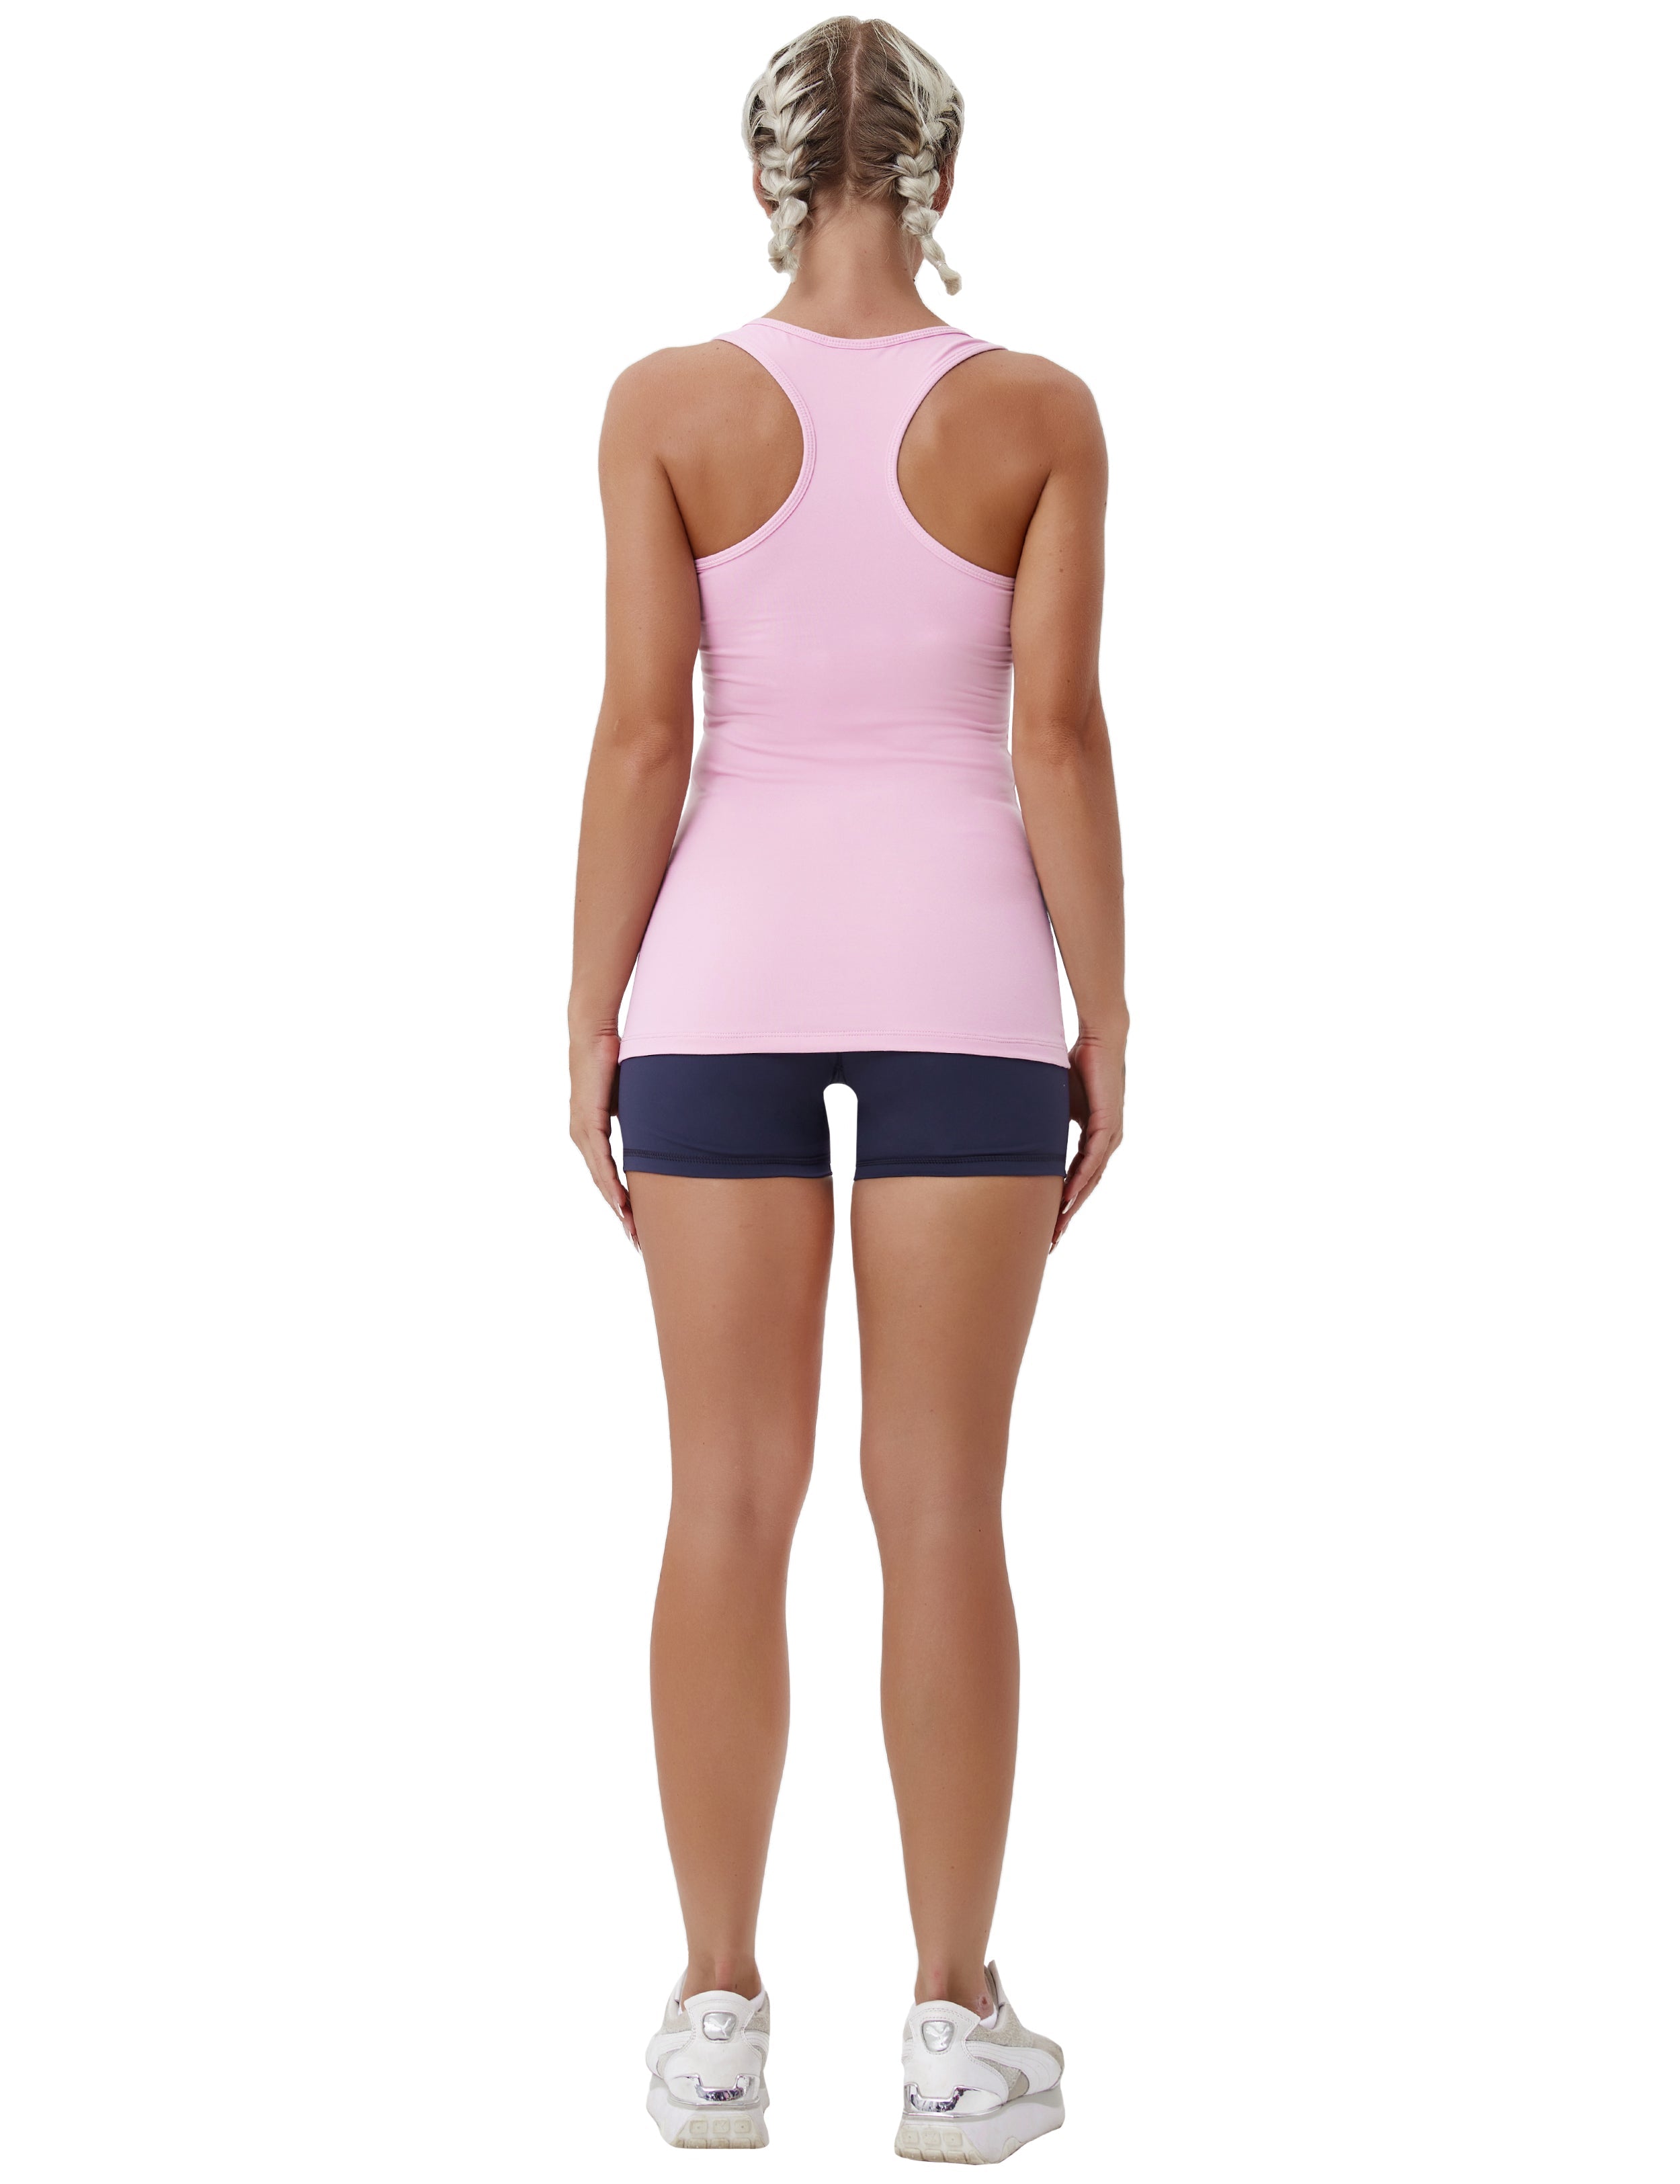 Racerback Athletic Tank Tops lightpink 92%Nylon/8%Spandex(Cotton Soft) Designed for Pilates Tight Fit So buttery soft, it feels weightless Sweat-wicking Four-way stretch Breathable Contours your body Sits below the waistband for moderate, everyday coverage